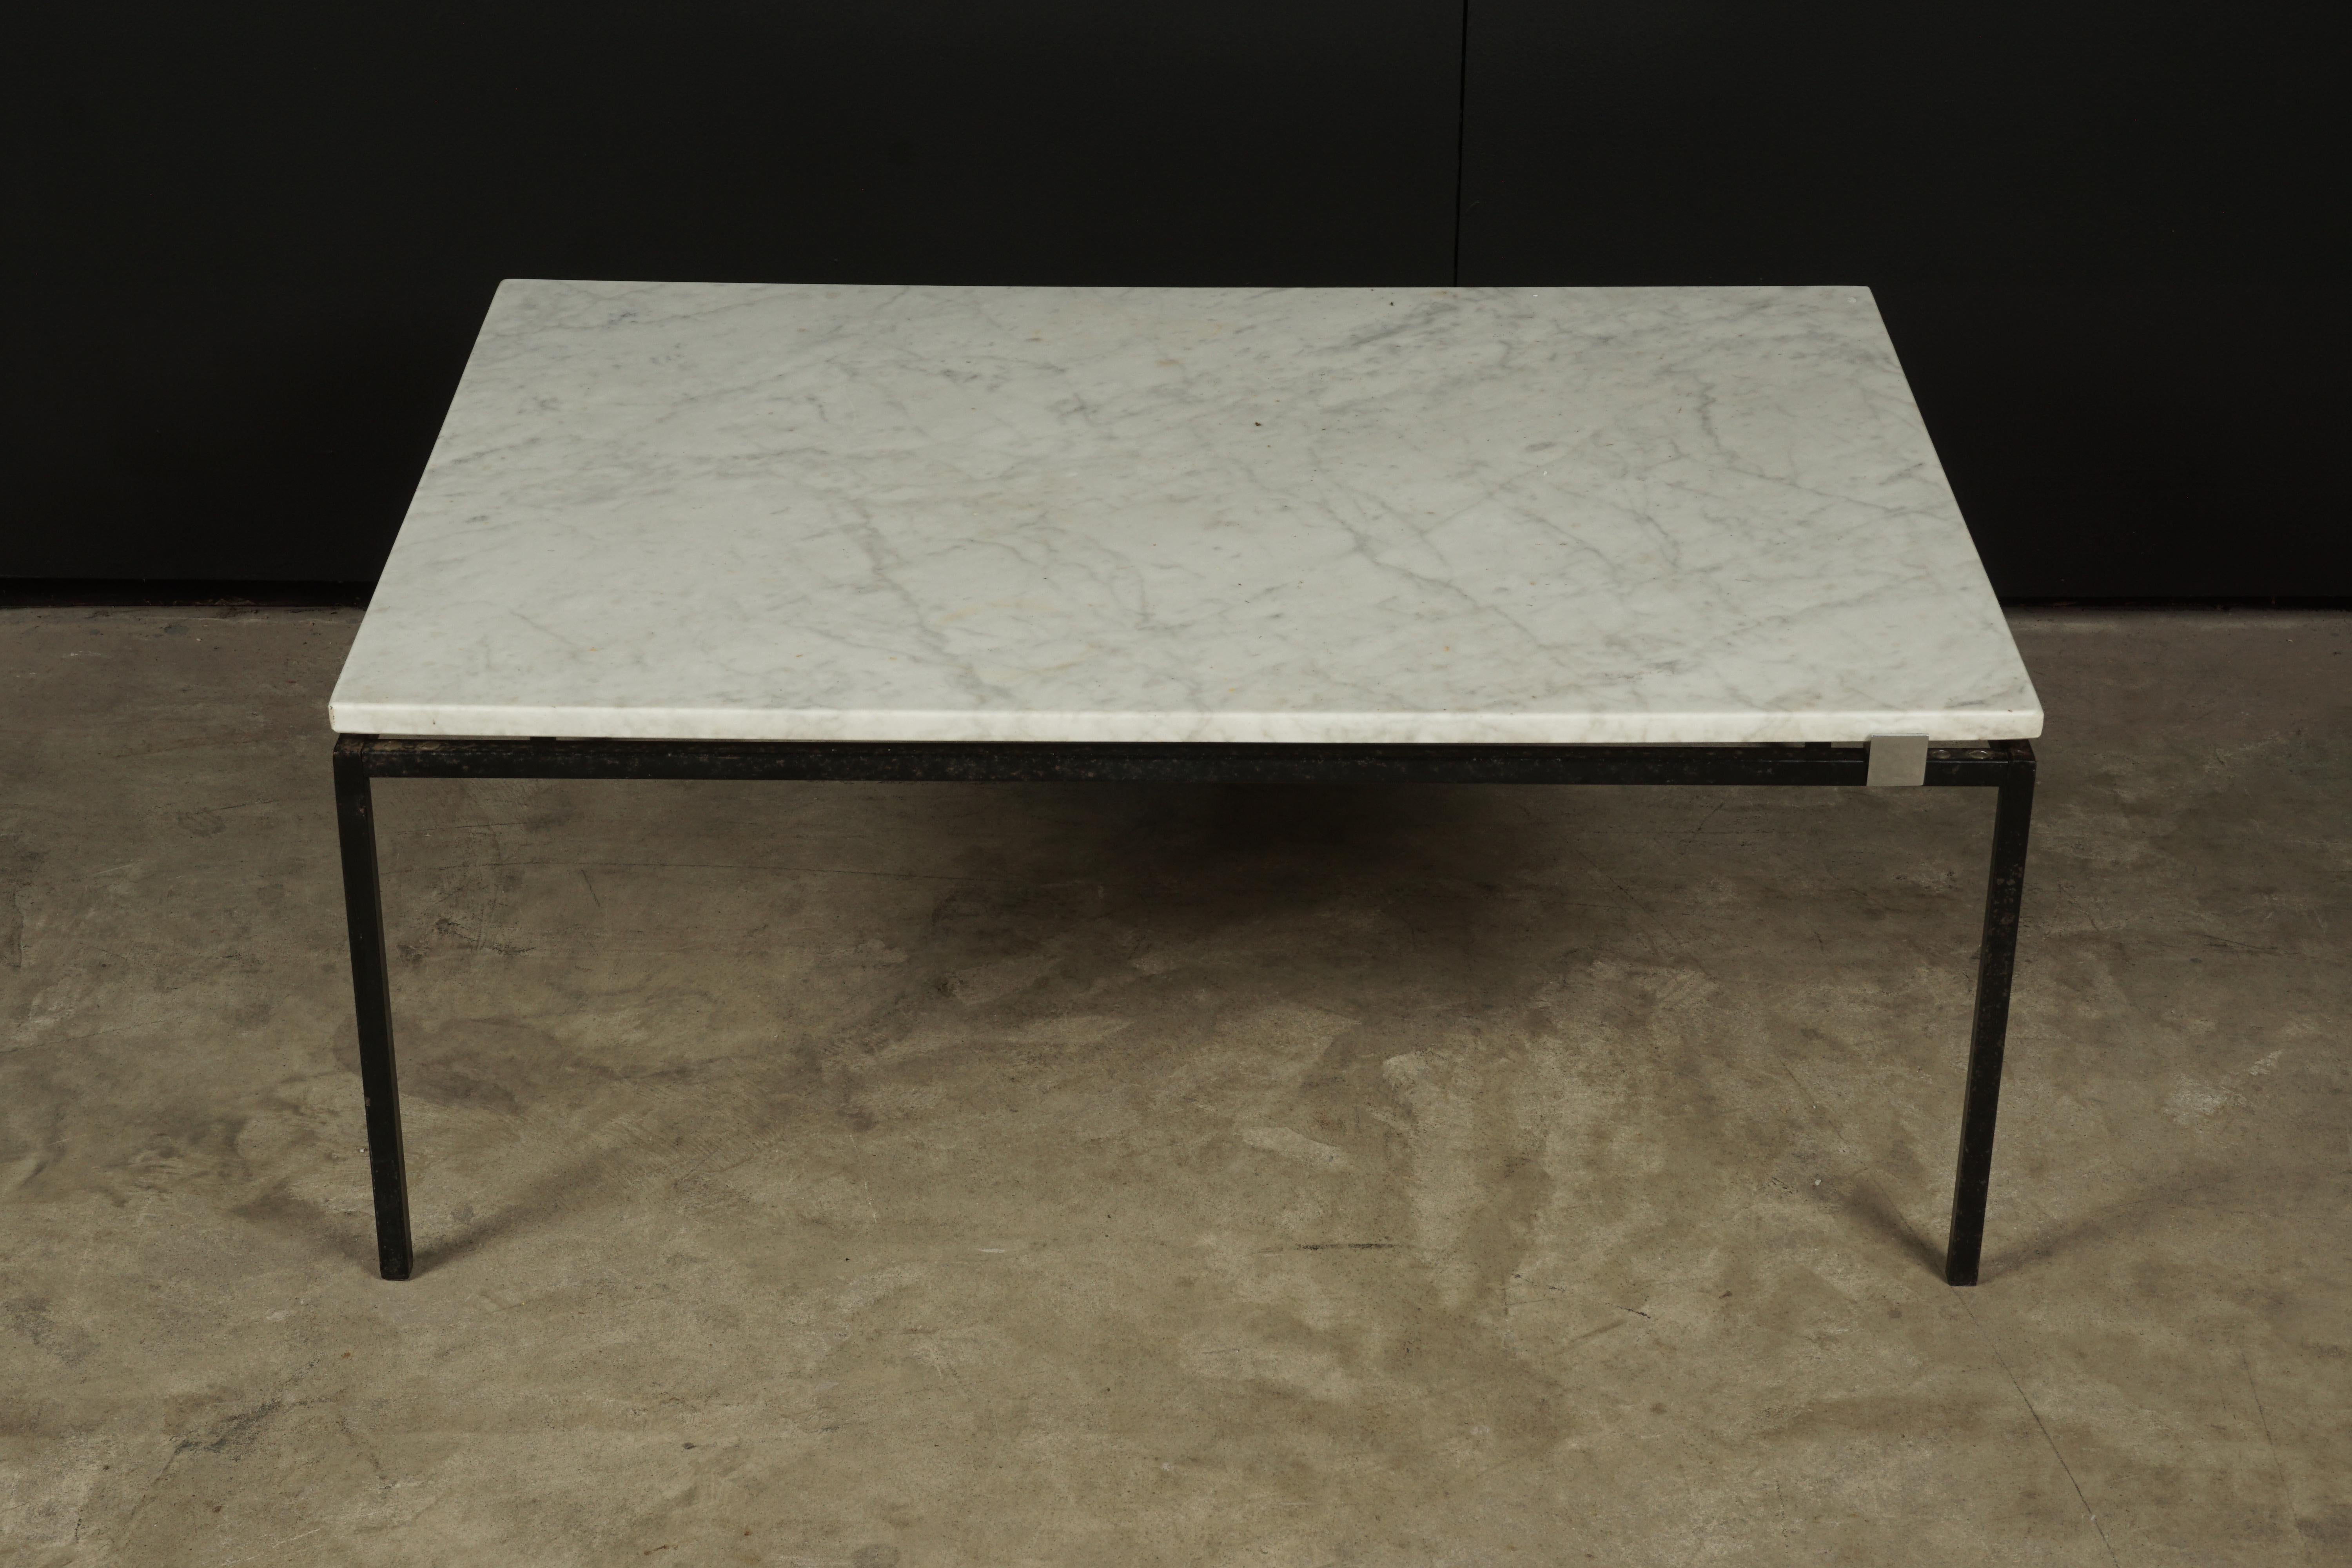 Midcentury marble coffee table, from France, 1970s. Steel base. Light patina and wear.